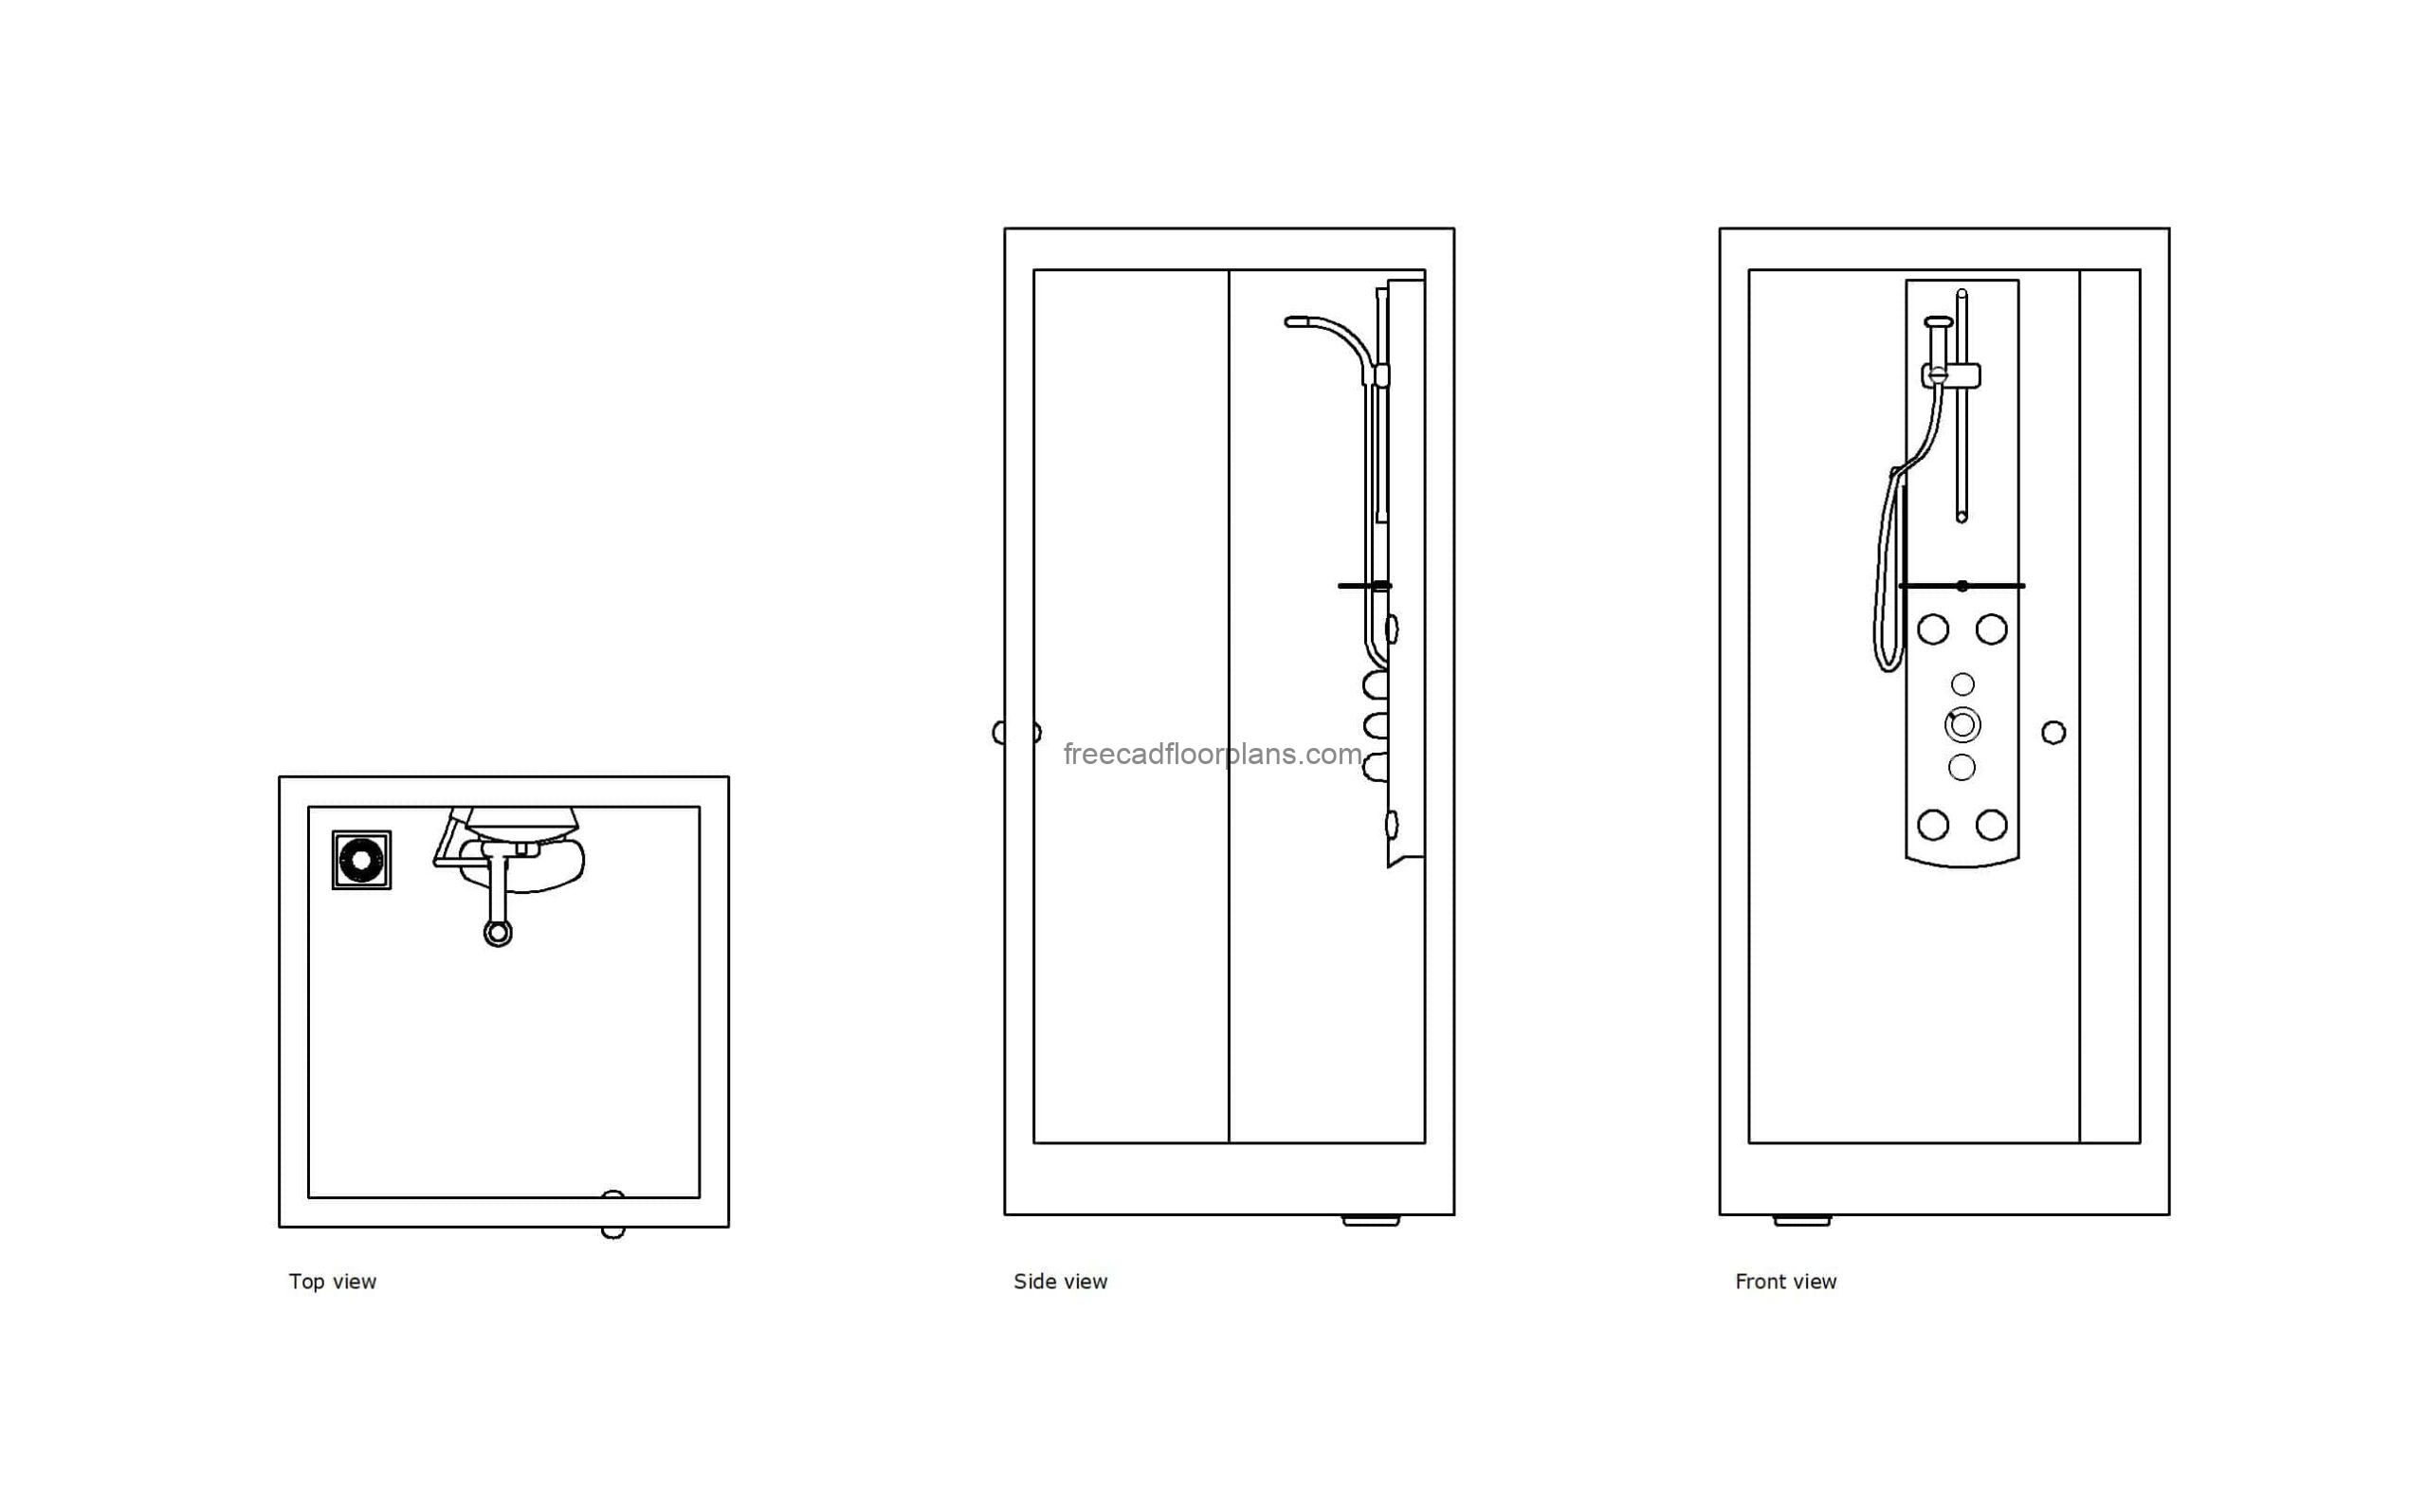 autocad drawing of a walk-in shower, plan and elevation 2d views, dwg file free for download